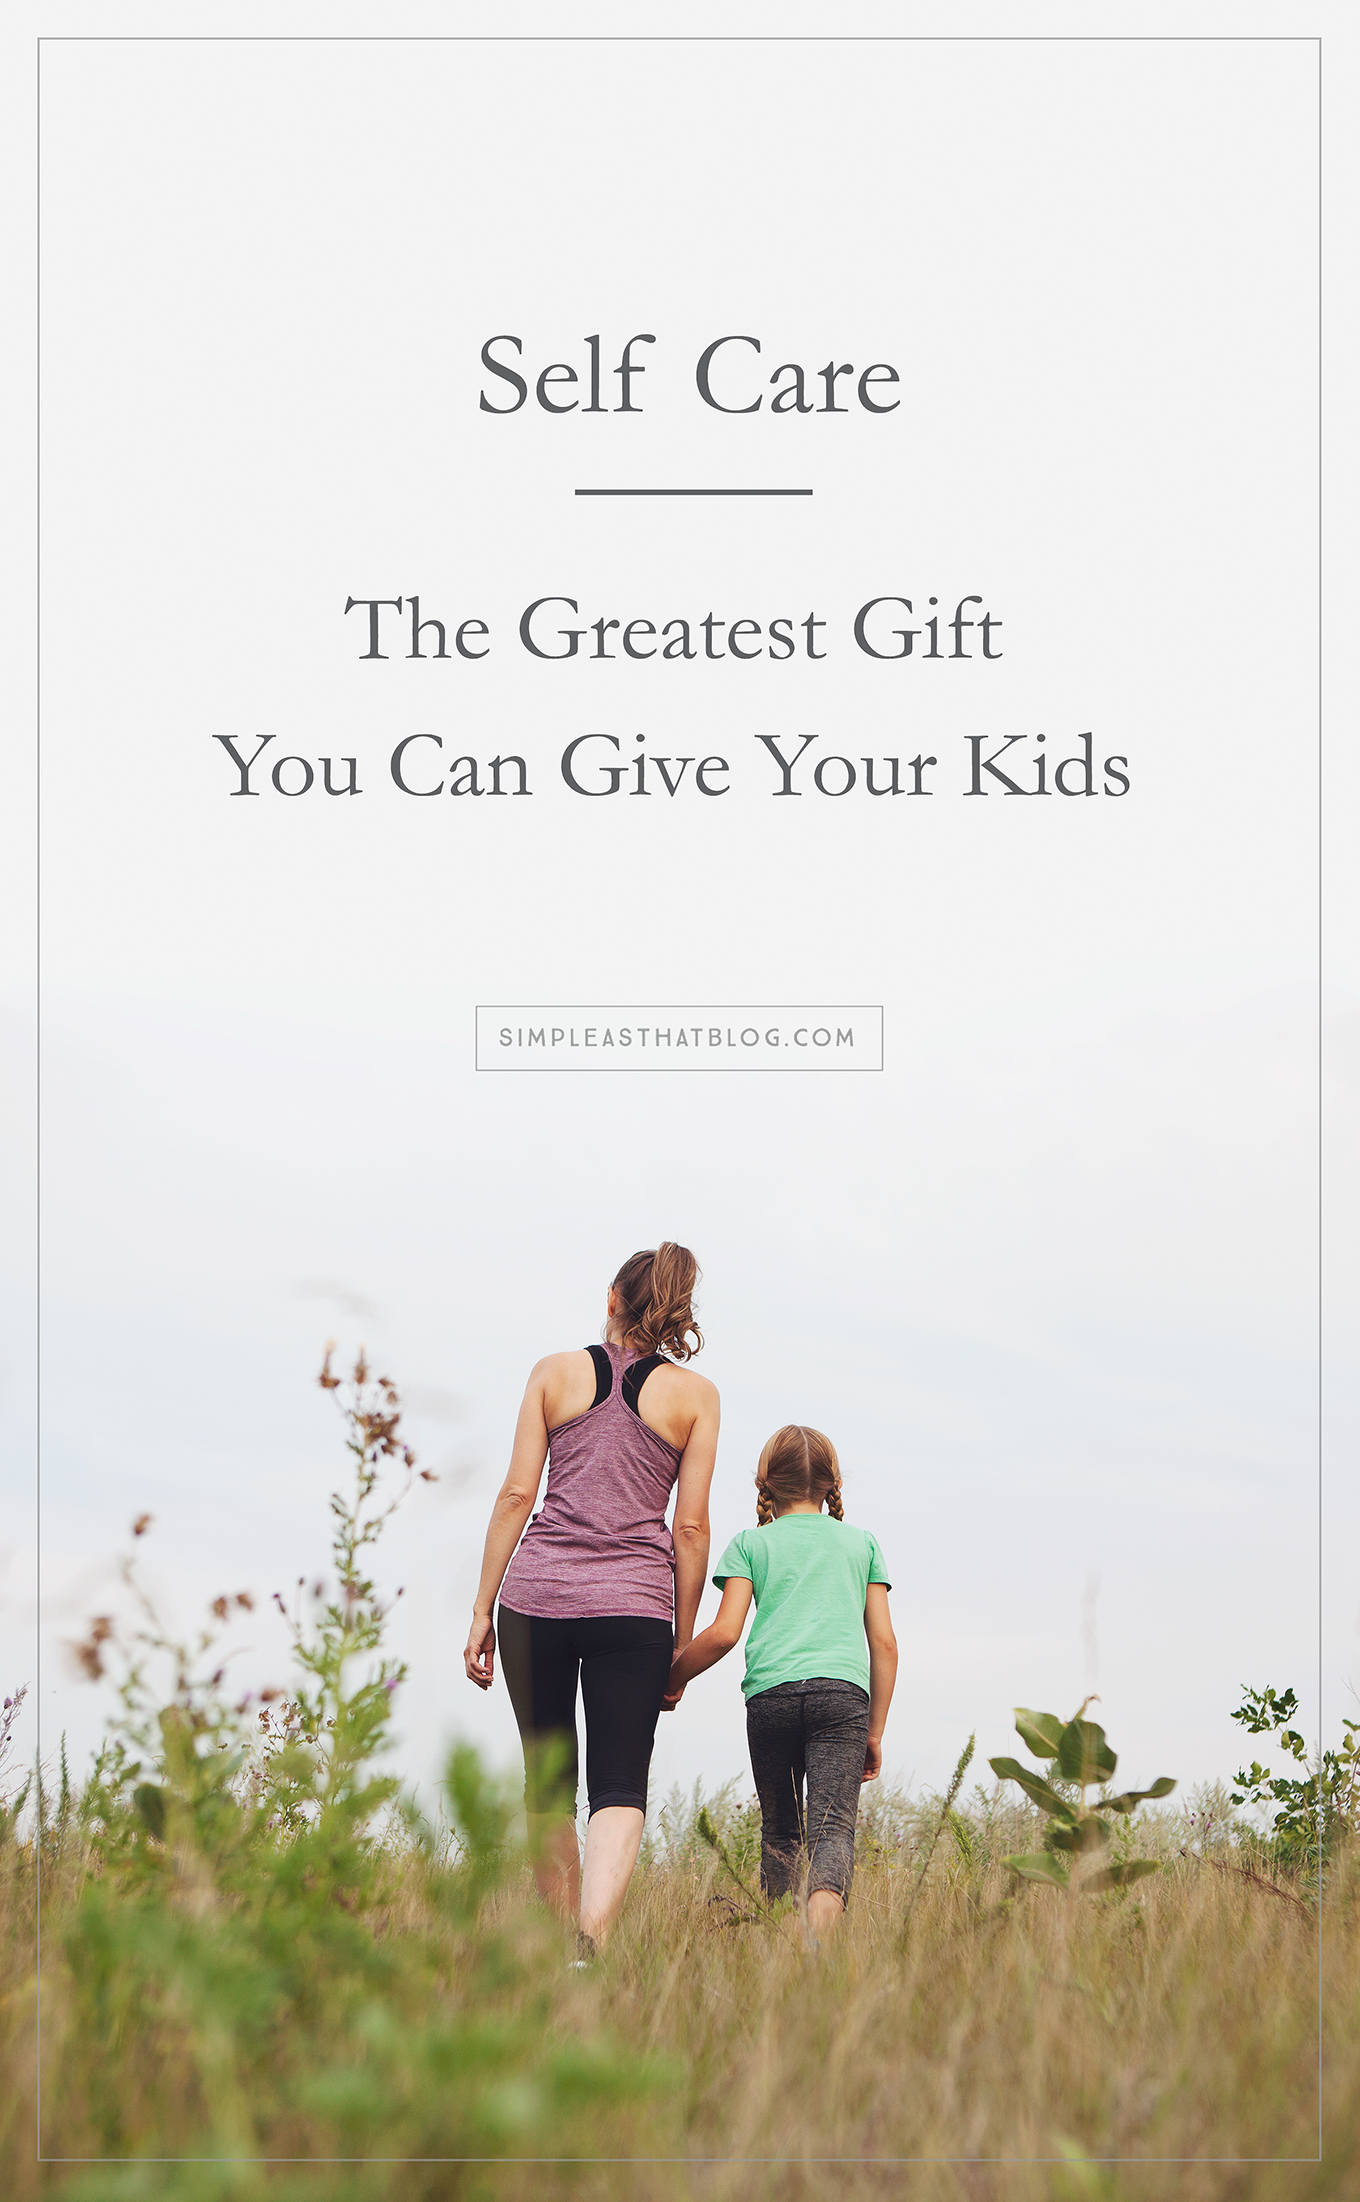 The greatest gift you can give your kids is a centered, rested, happy mom. That starts with taking care of YOU.